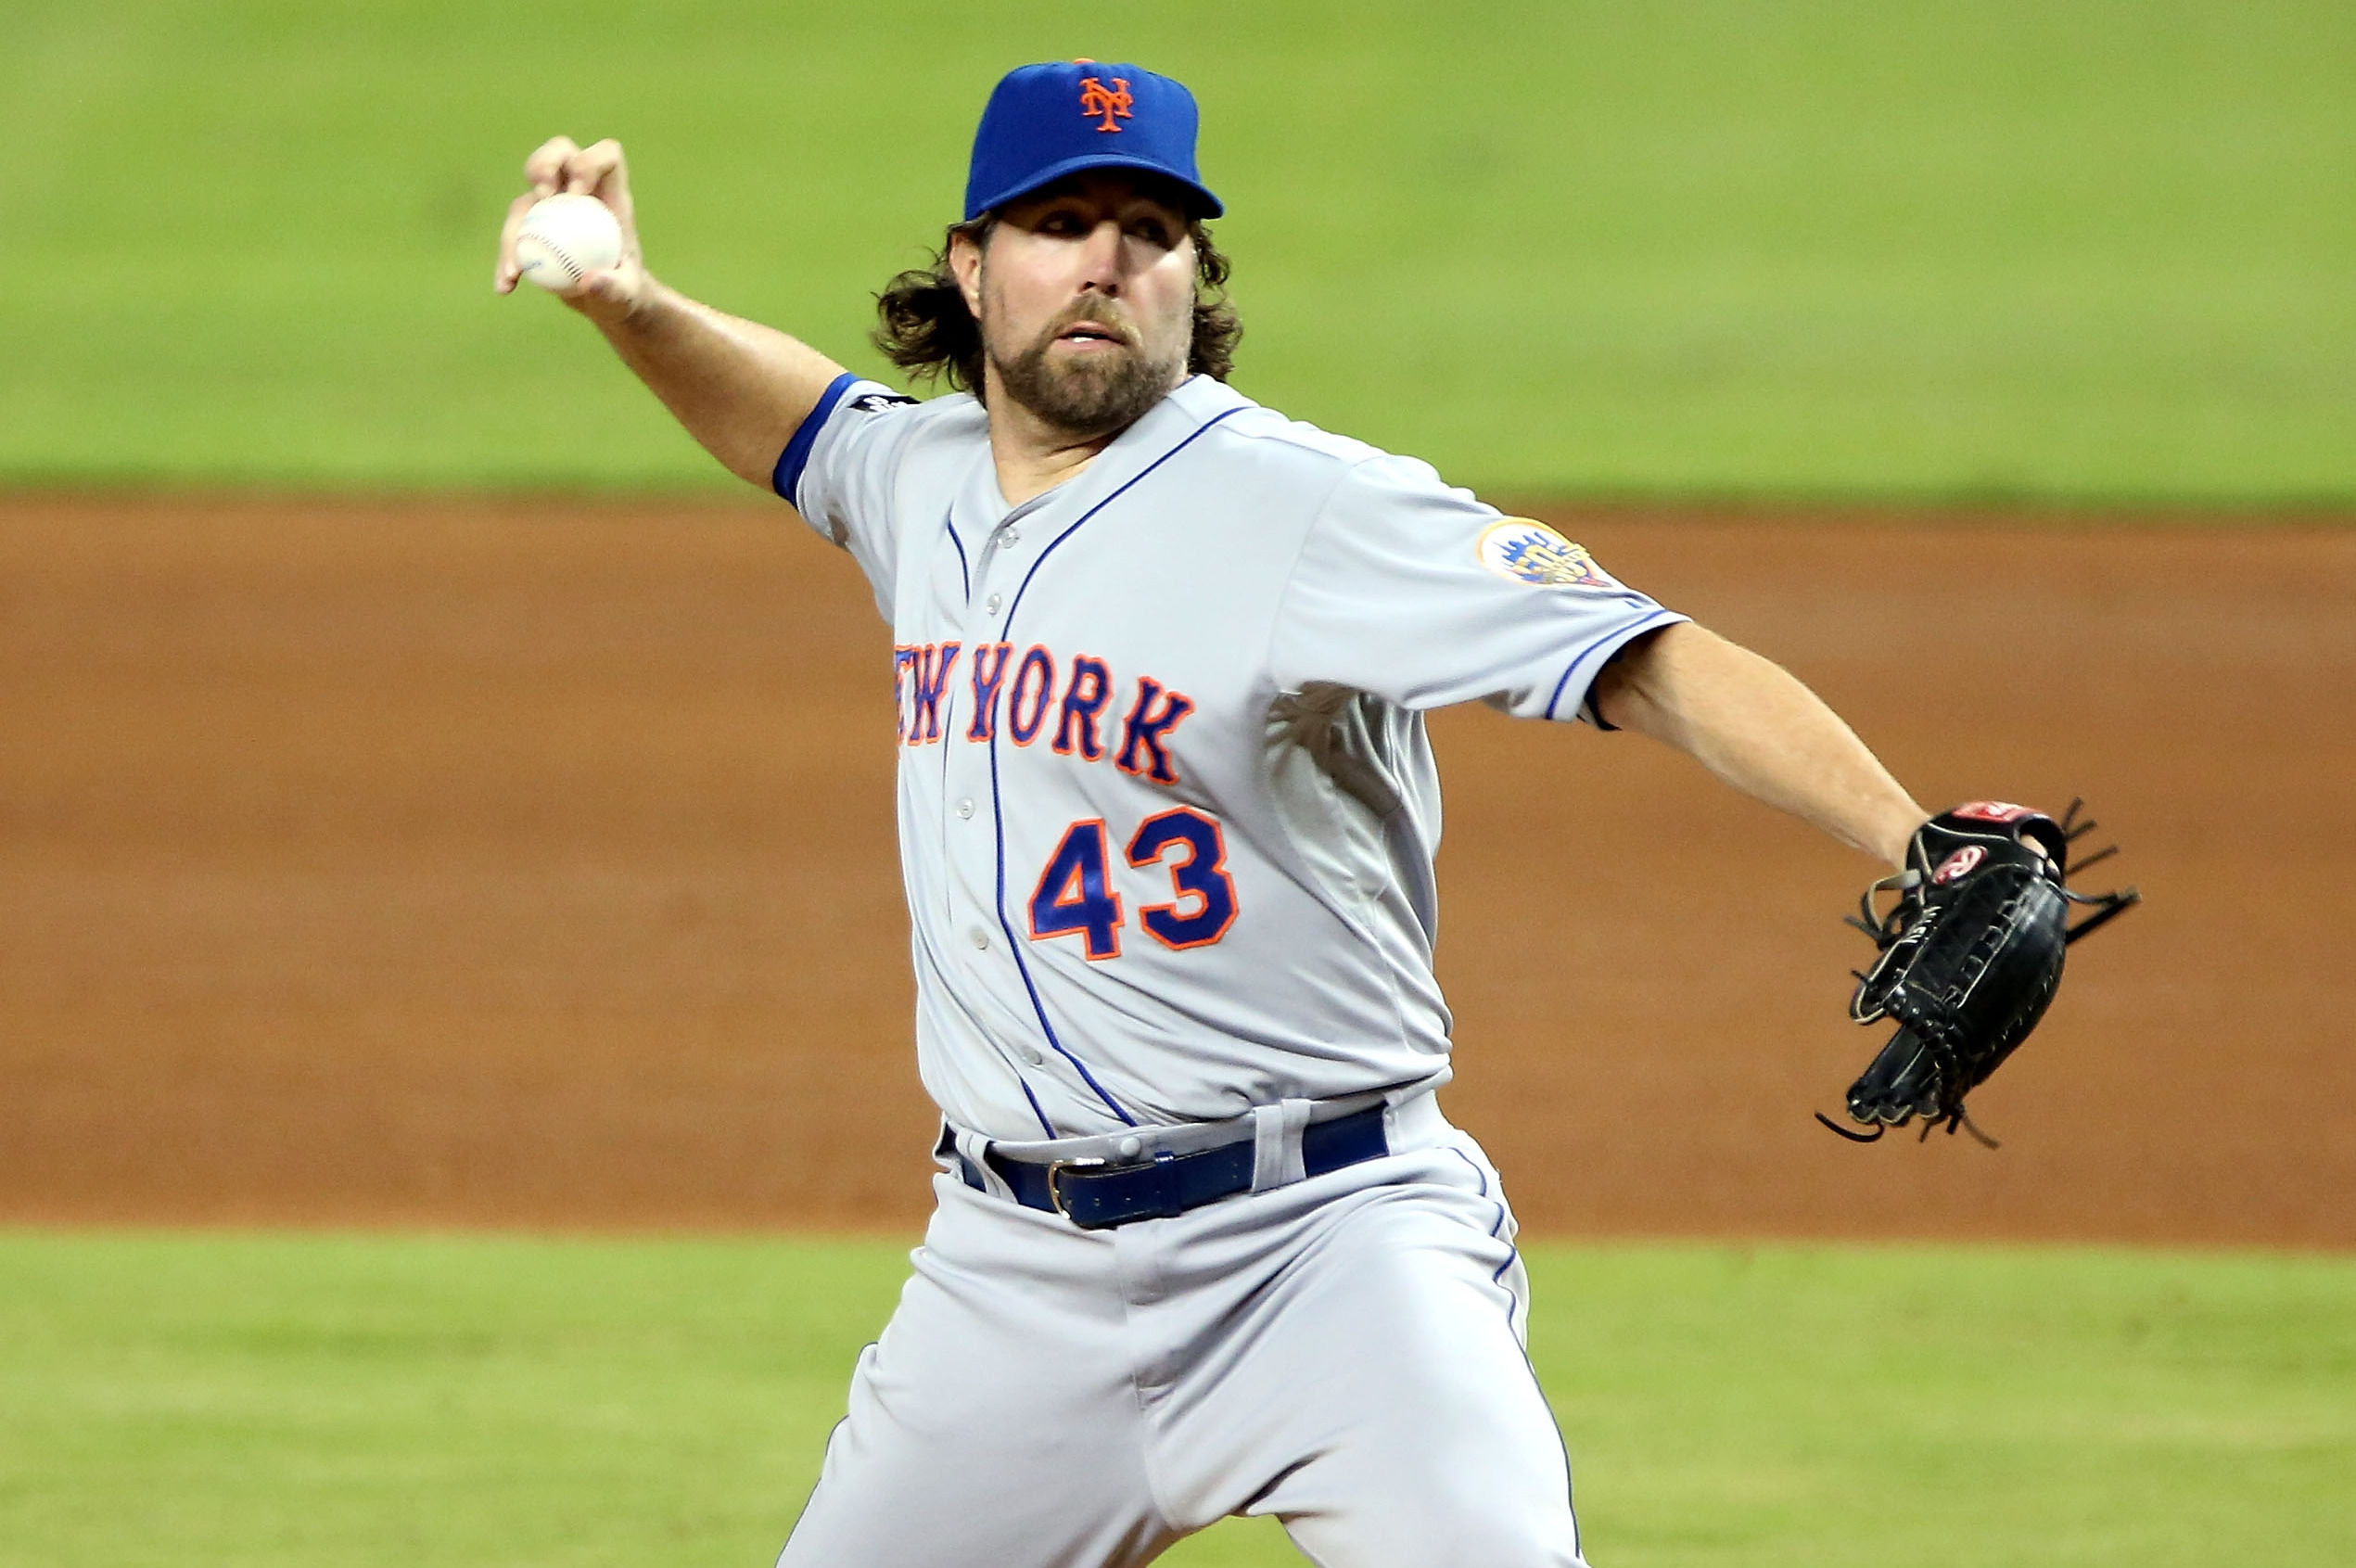 Mets Traded R.a. Dickey to Land Noah Syndergaard 4 Years Ago, and